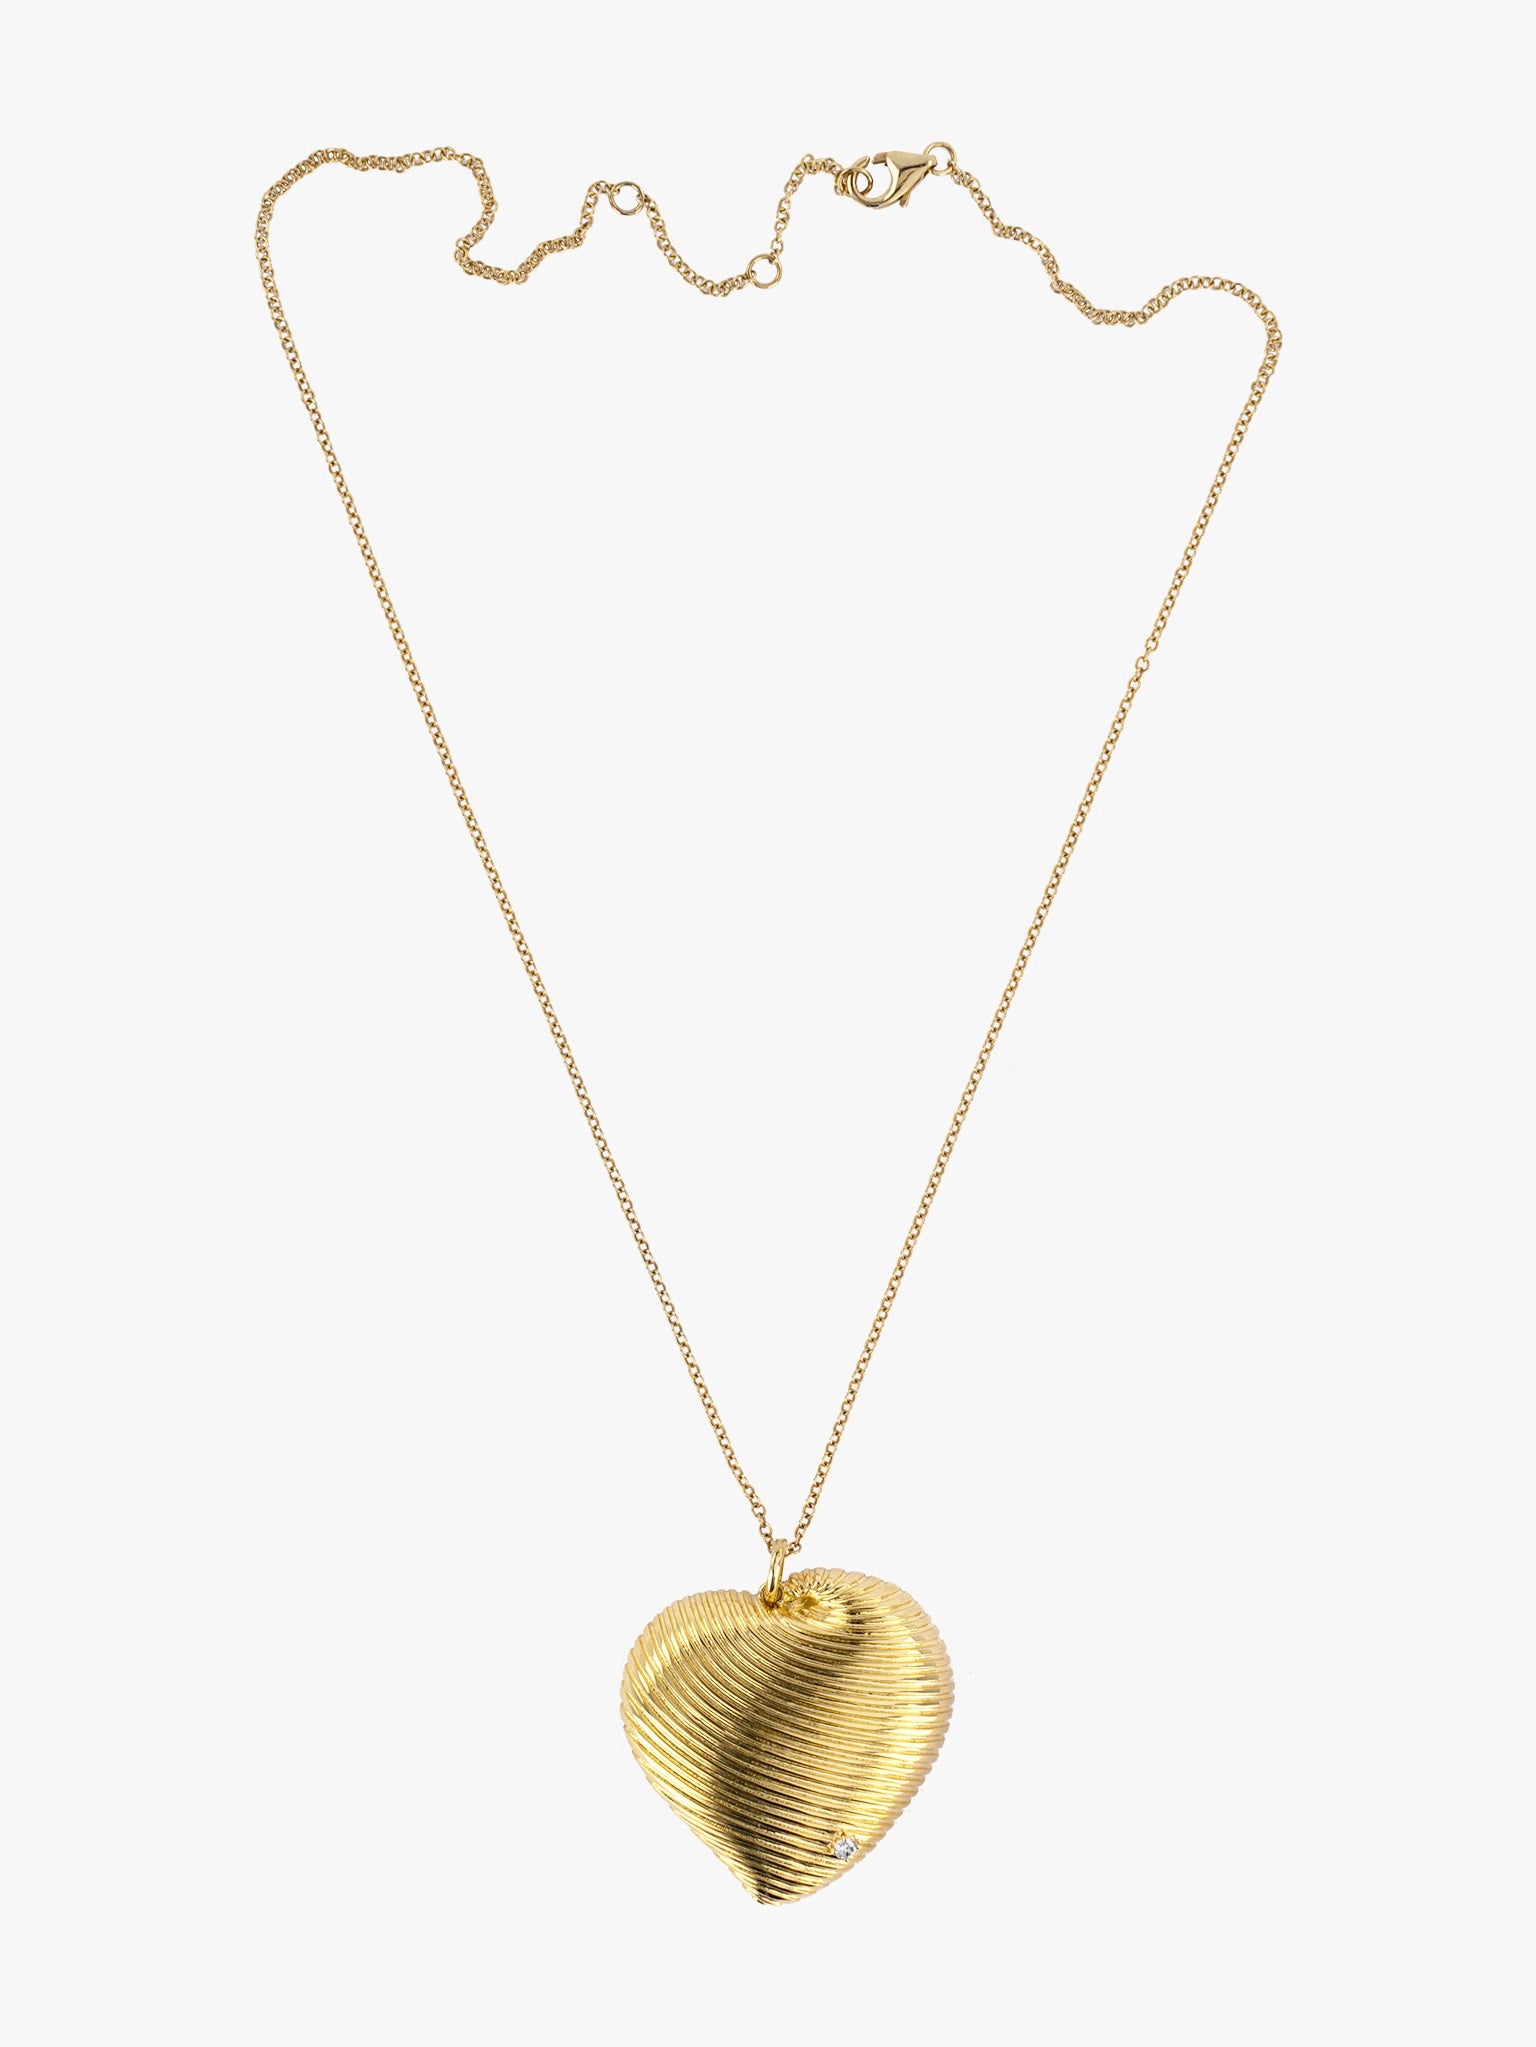 Diamond and gold heart pendant necklace